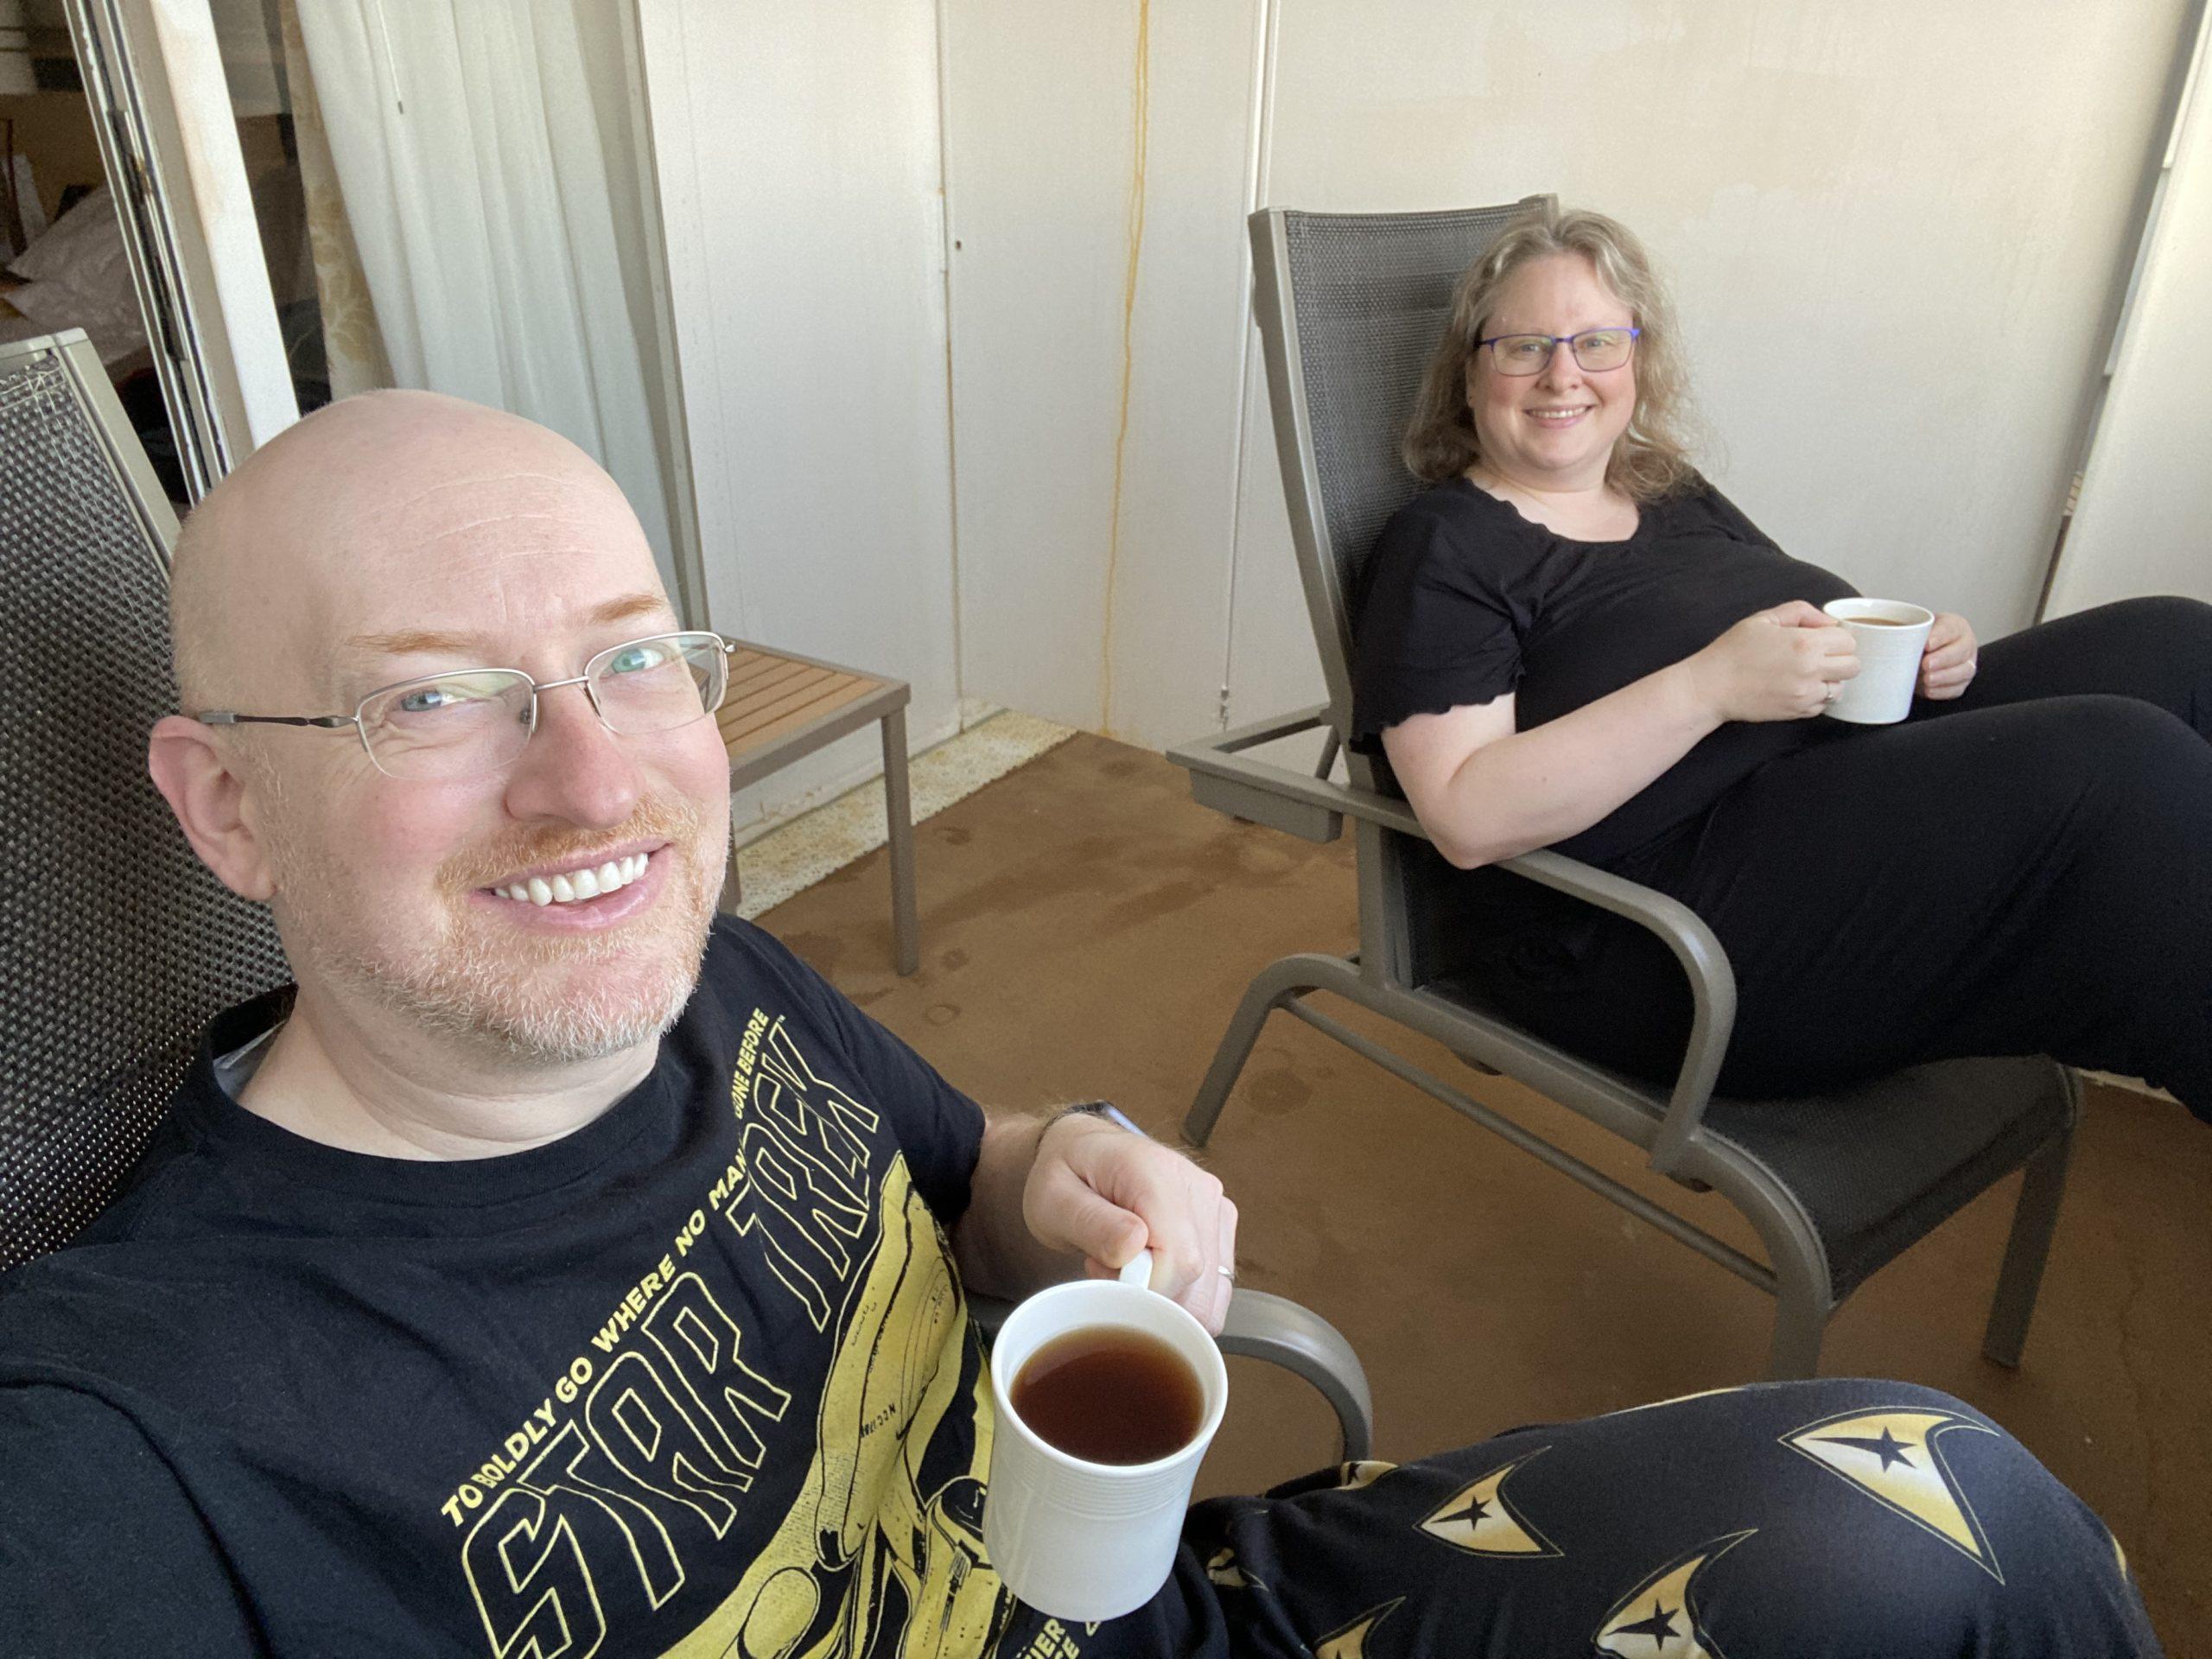 My wife and I in deck chairs on our stateroom balcony, wearing comfy jammies, holding mugs of warm drinks.